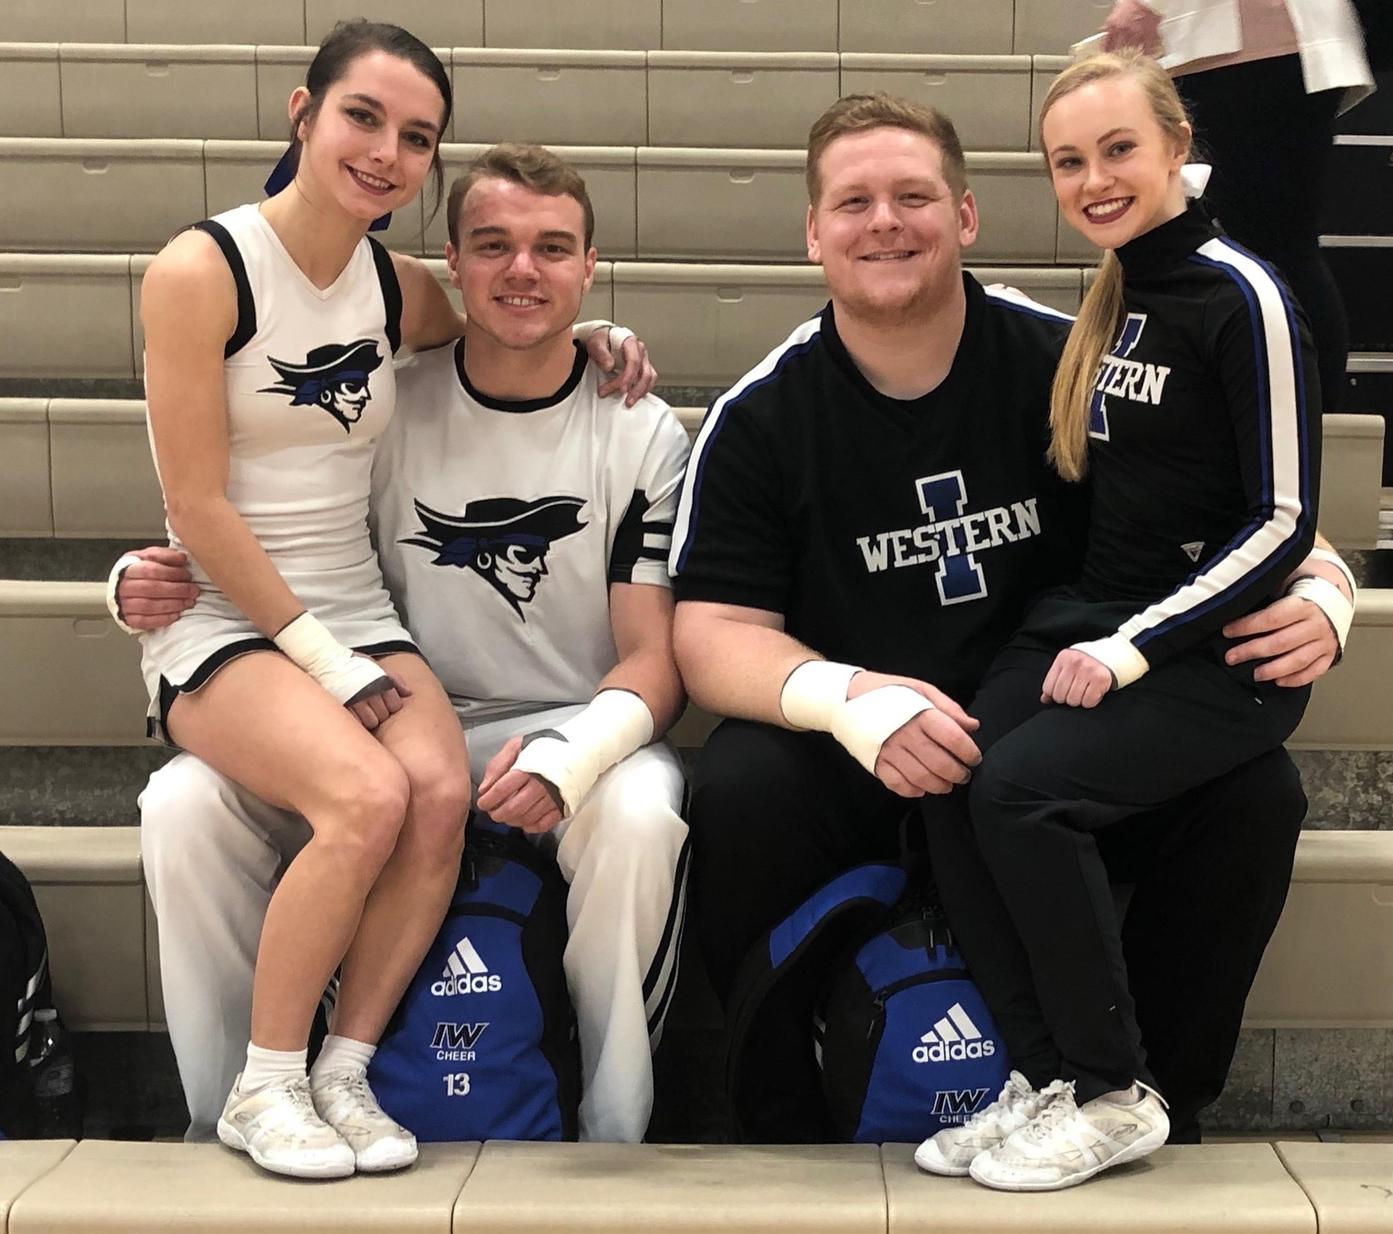 Iowa Western Cheer displays skills at local competition